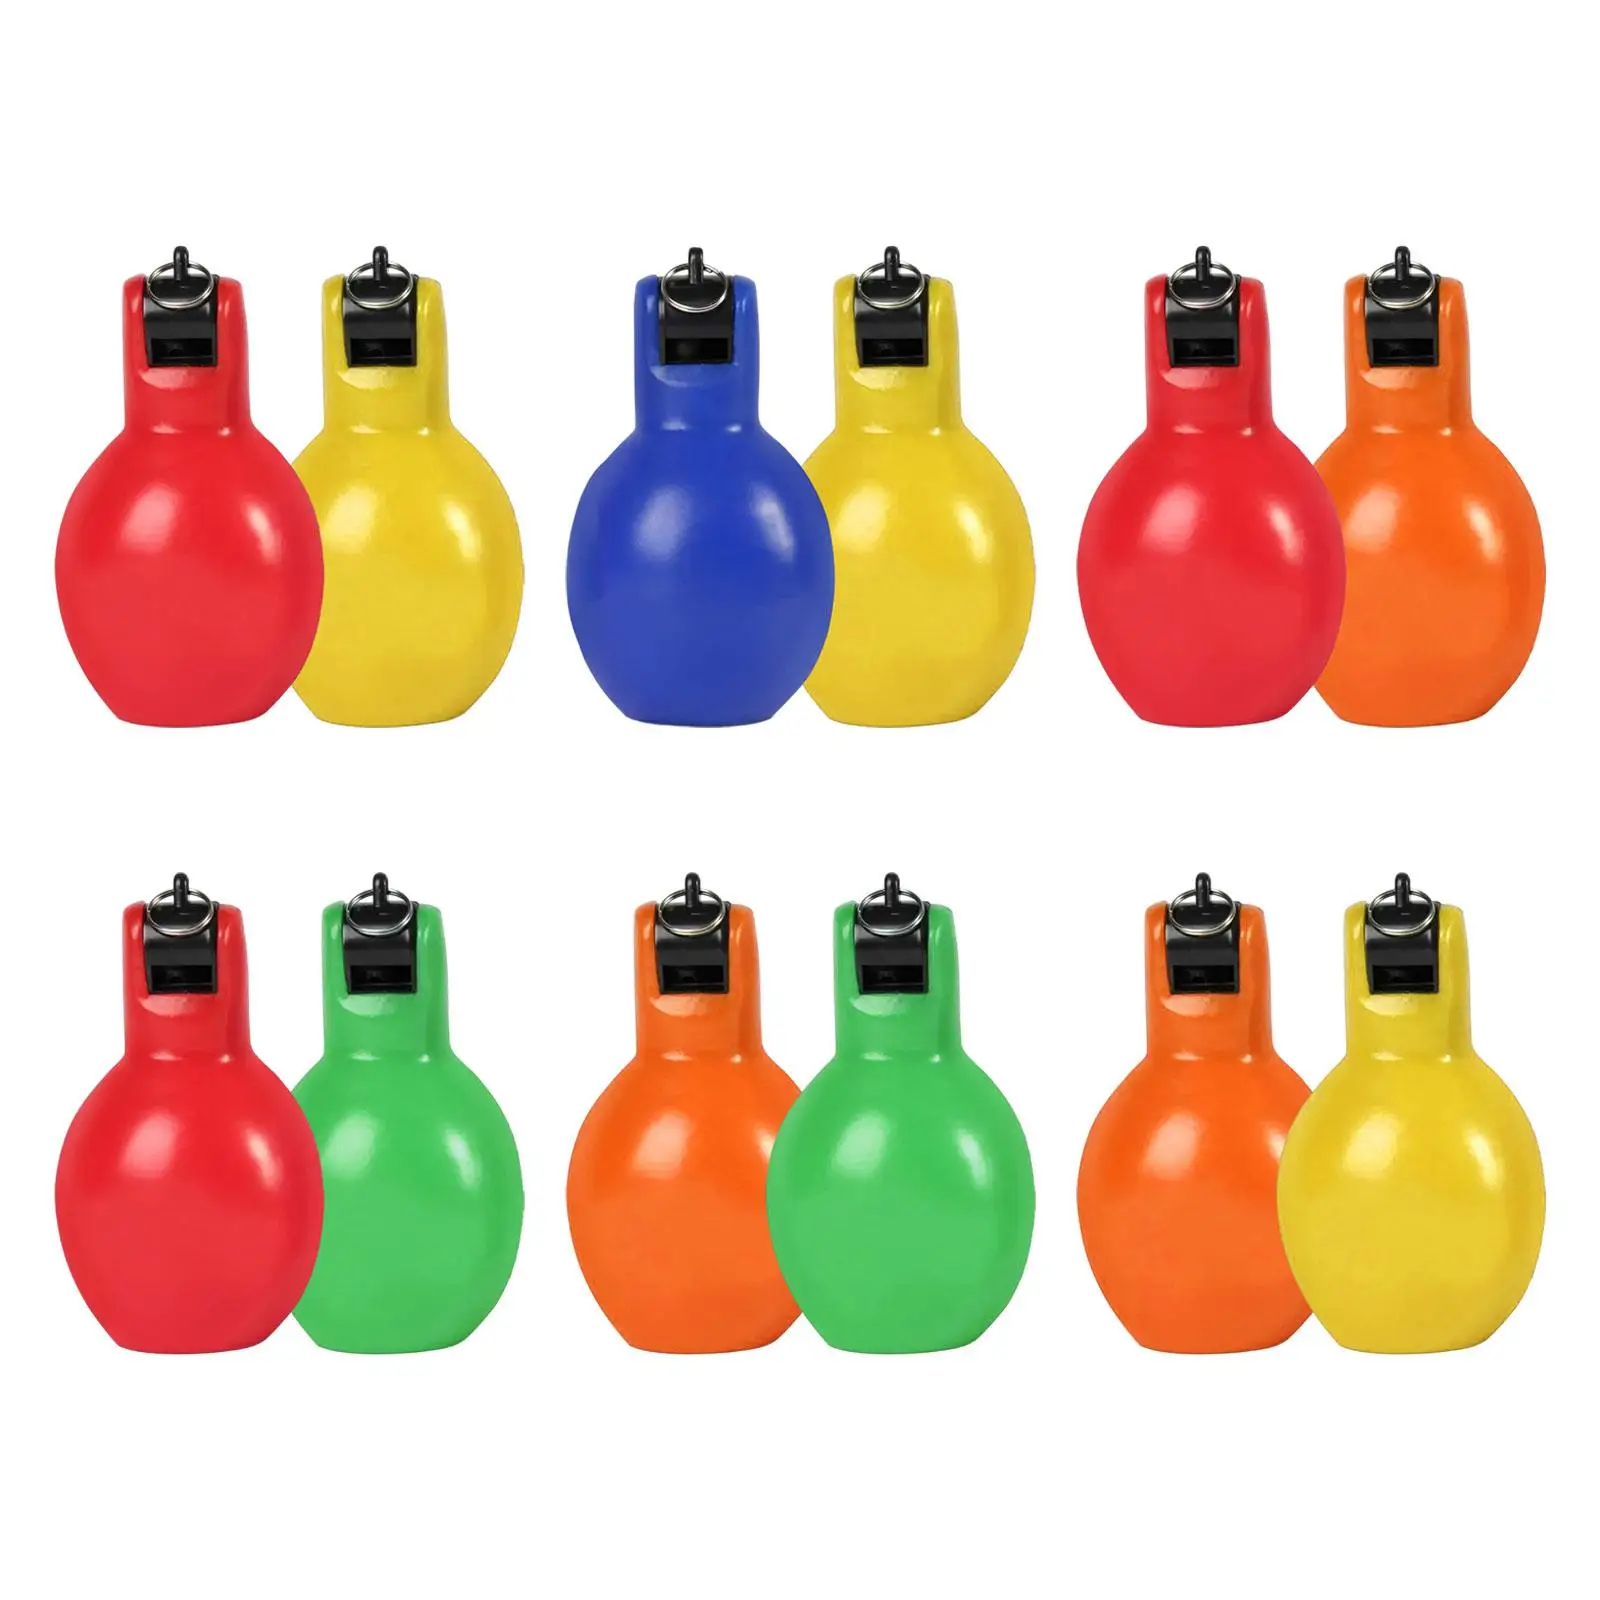 2 Pieces Hand Squeeze Whistles Loud Sound Portable Manual Handheld Coaches